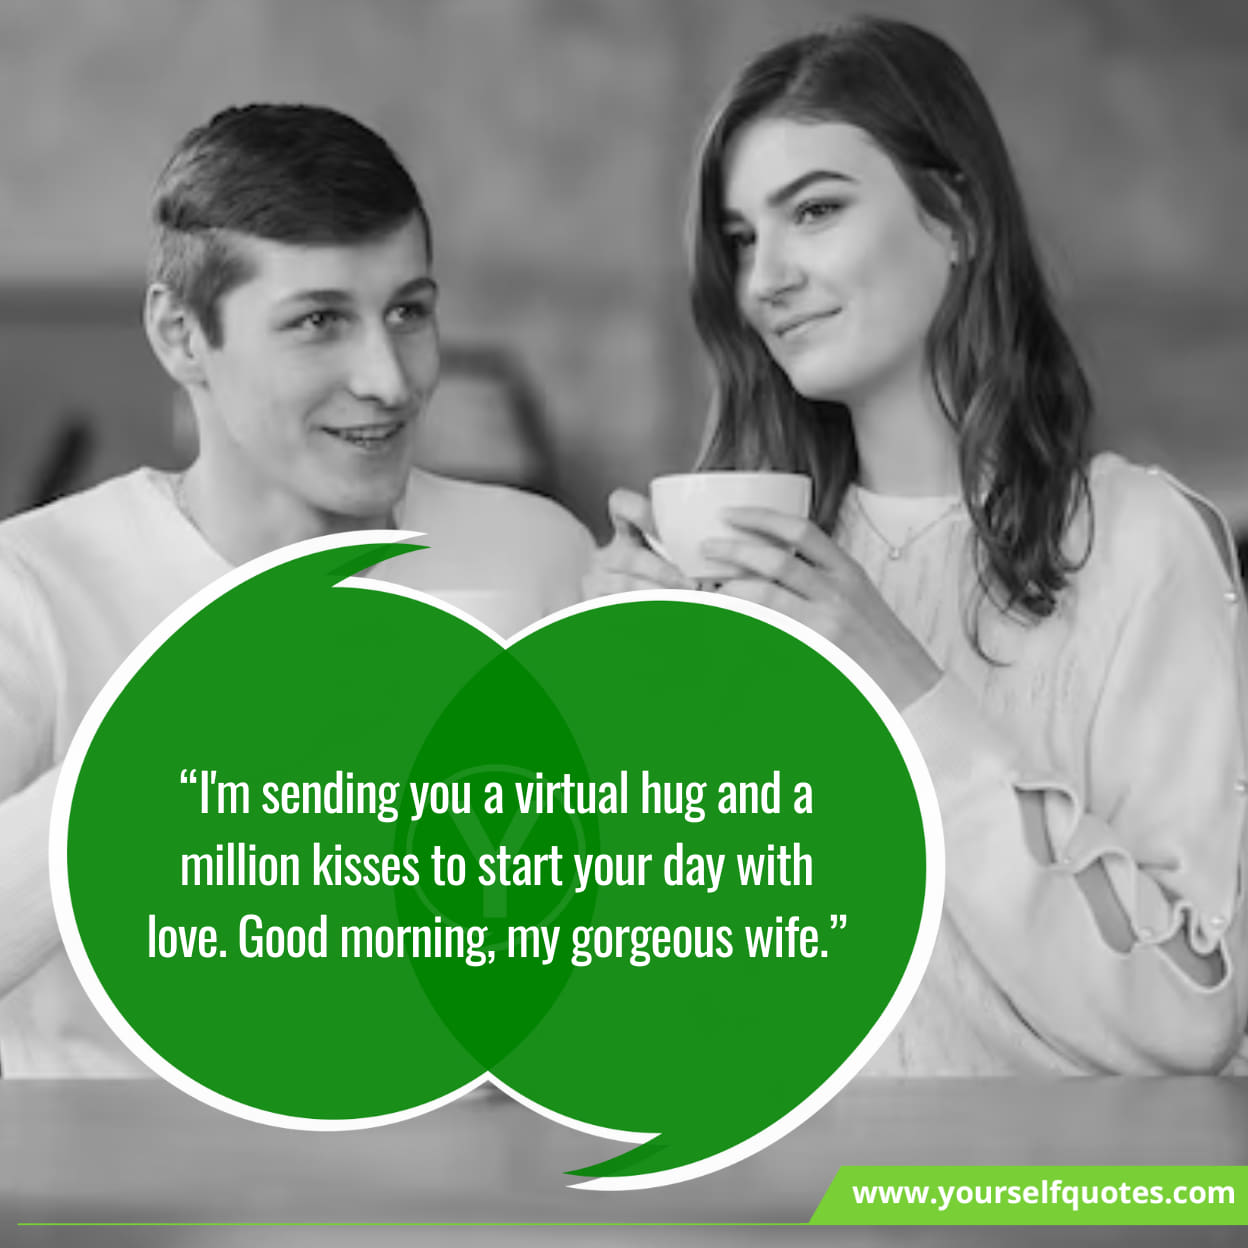 Inspirational Good Morning Messages For Wife